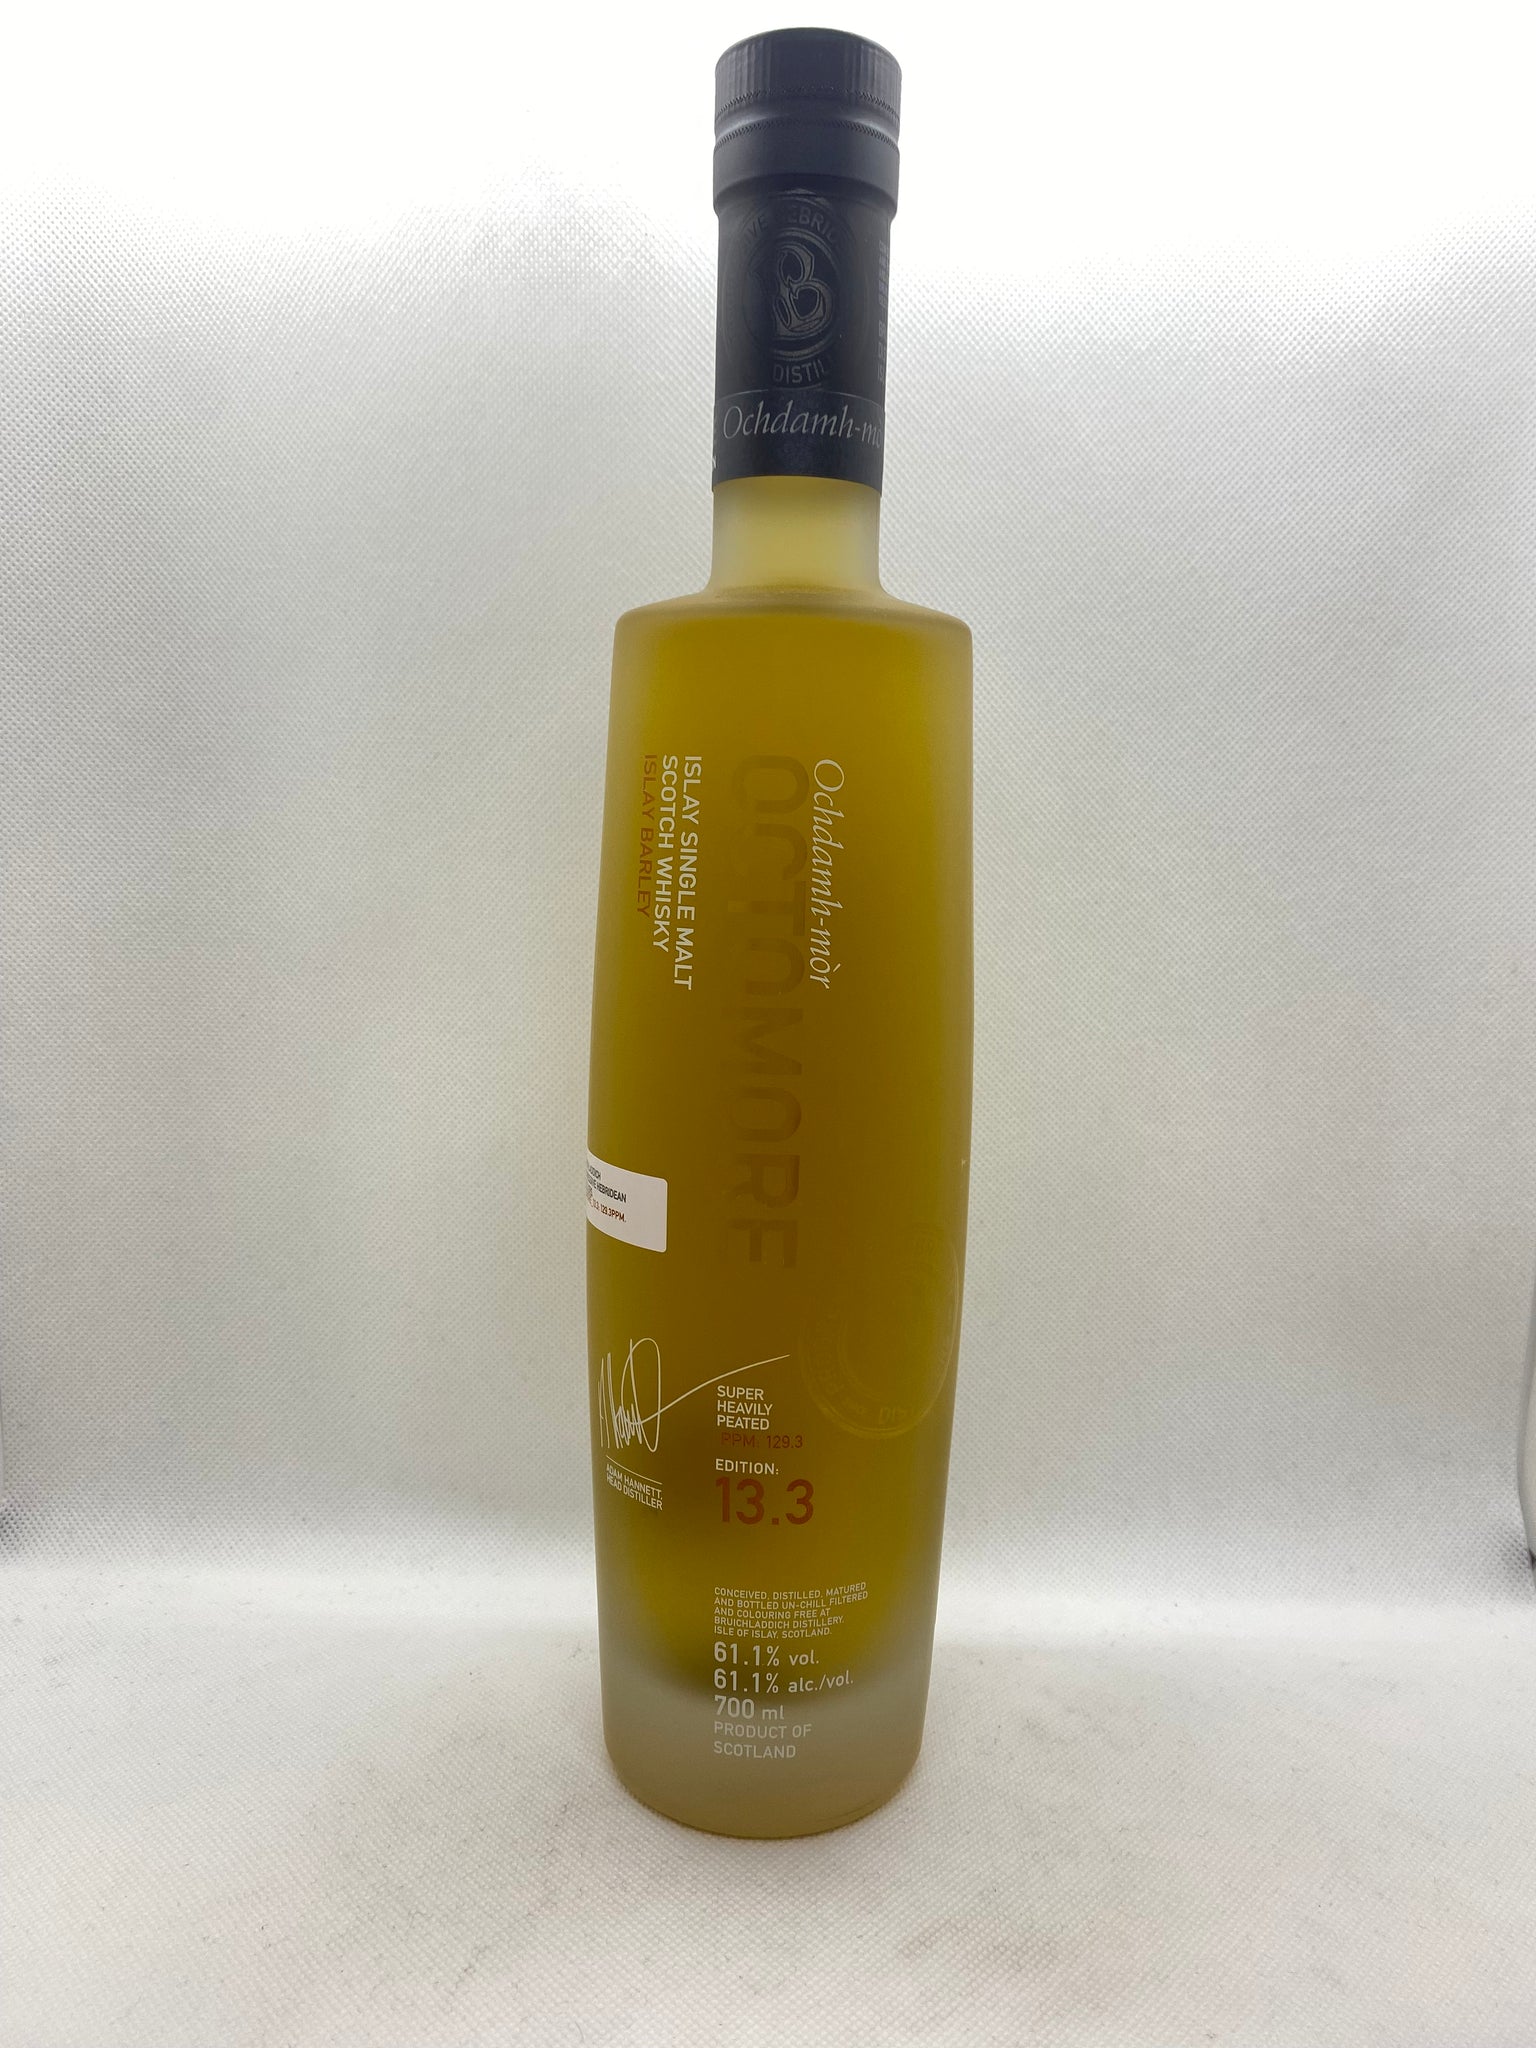 OCTOMORE 13.3 61.1° 70cl